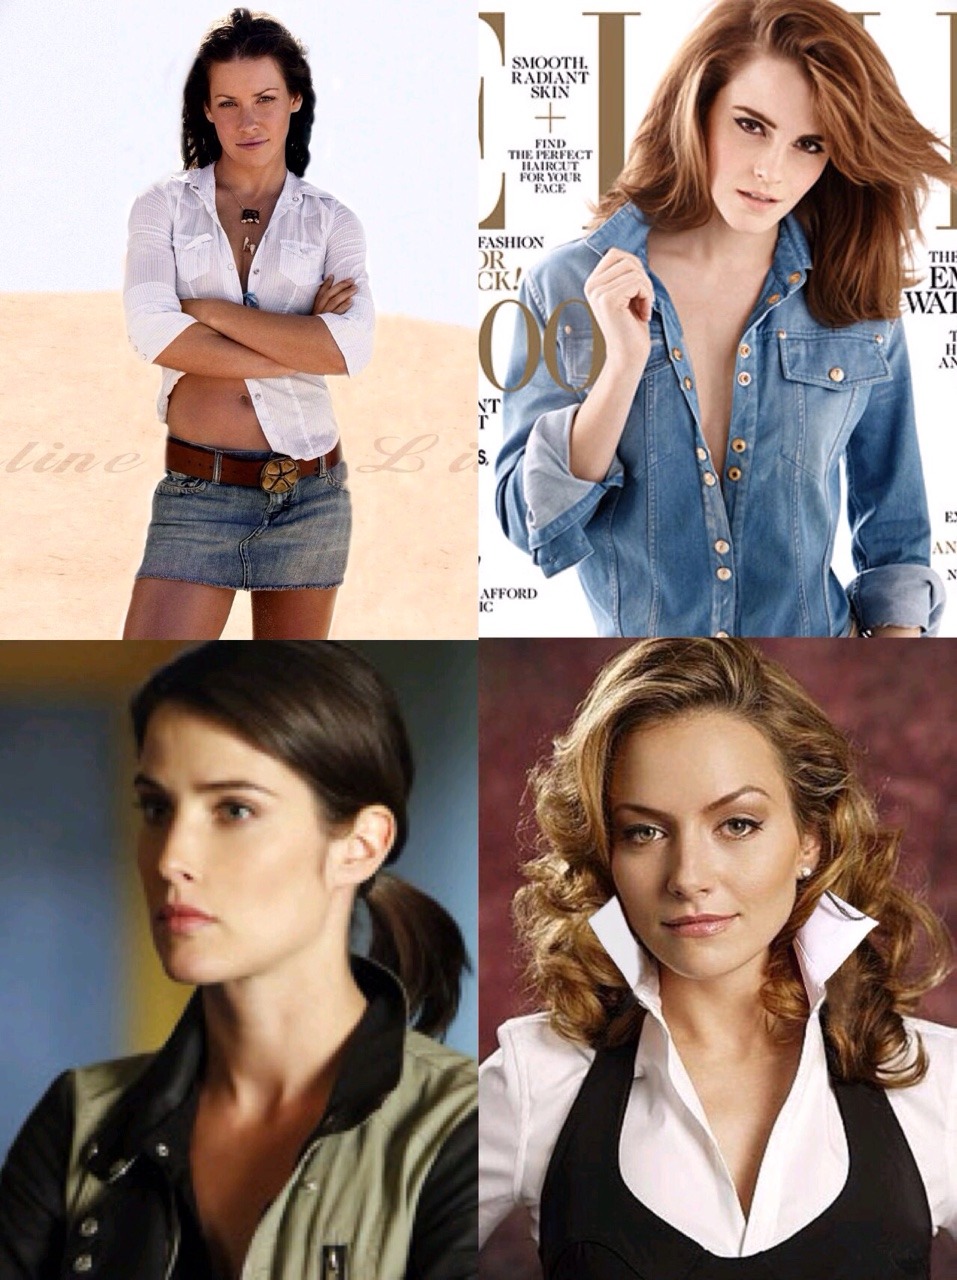 Ladies looking fine: shirts and collars